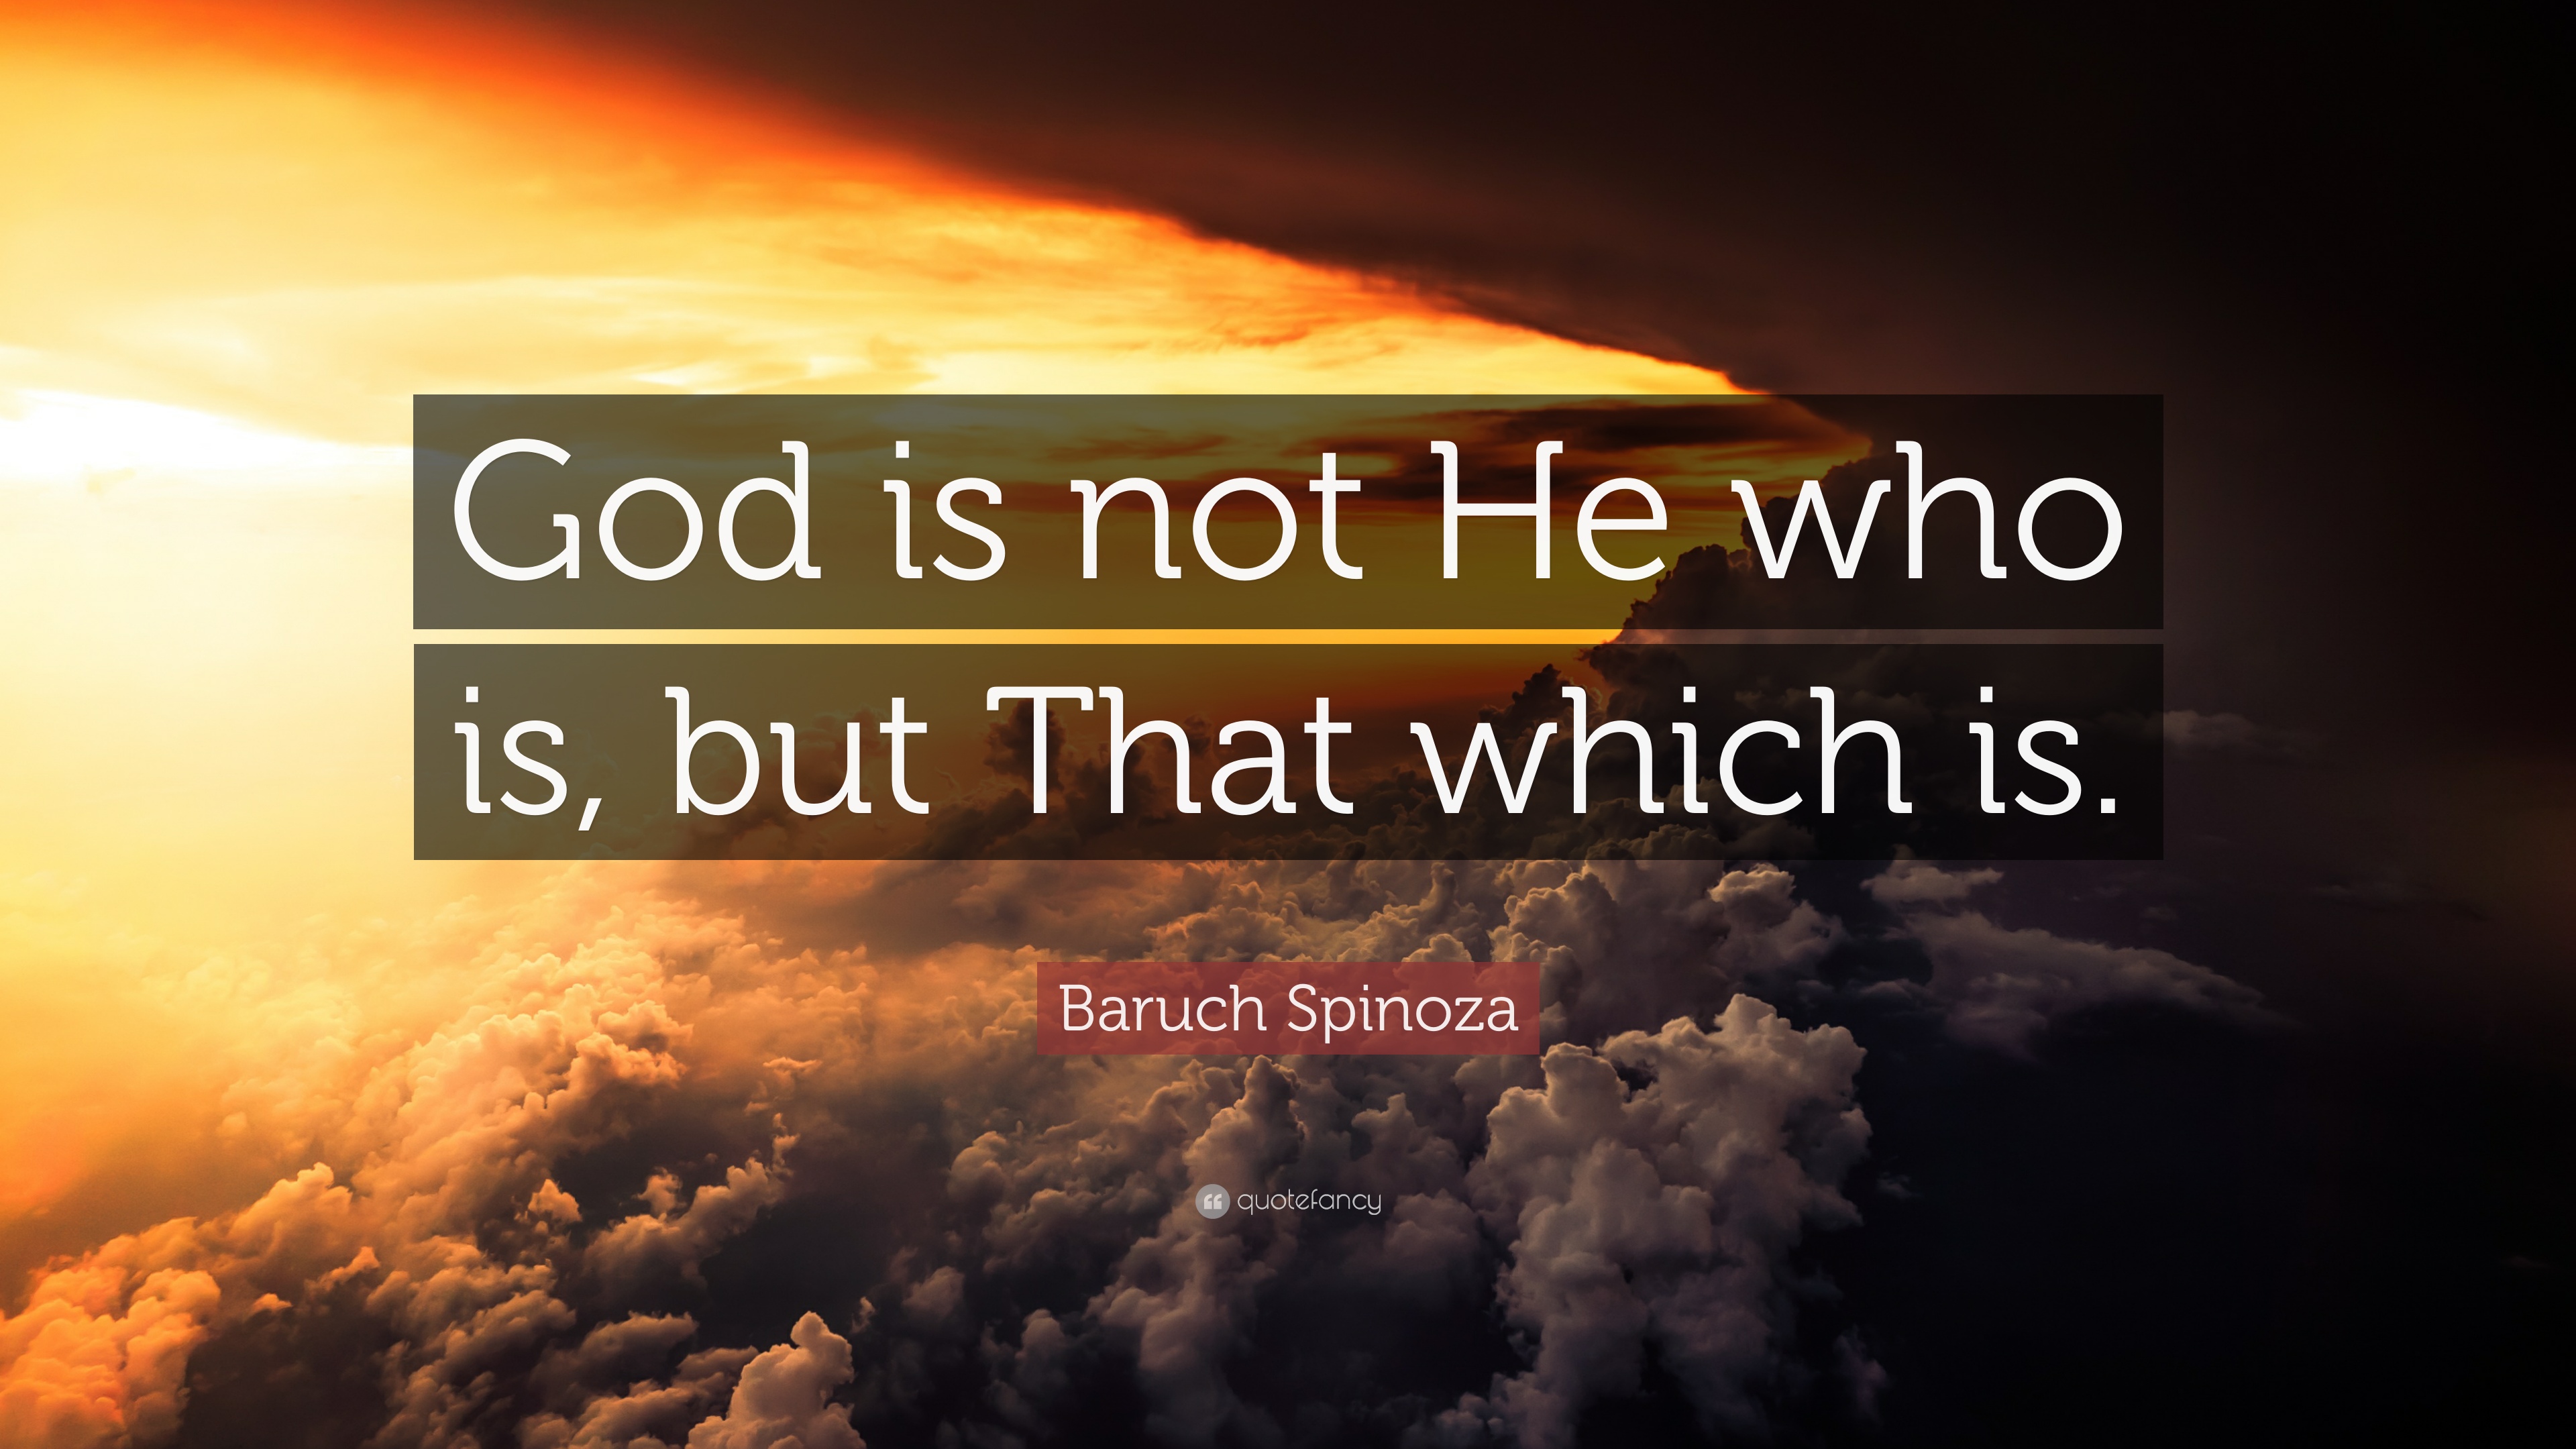 Baruch spinoza quote âgod is not he who is but that which isâ